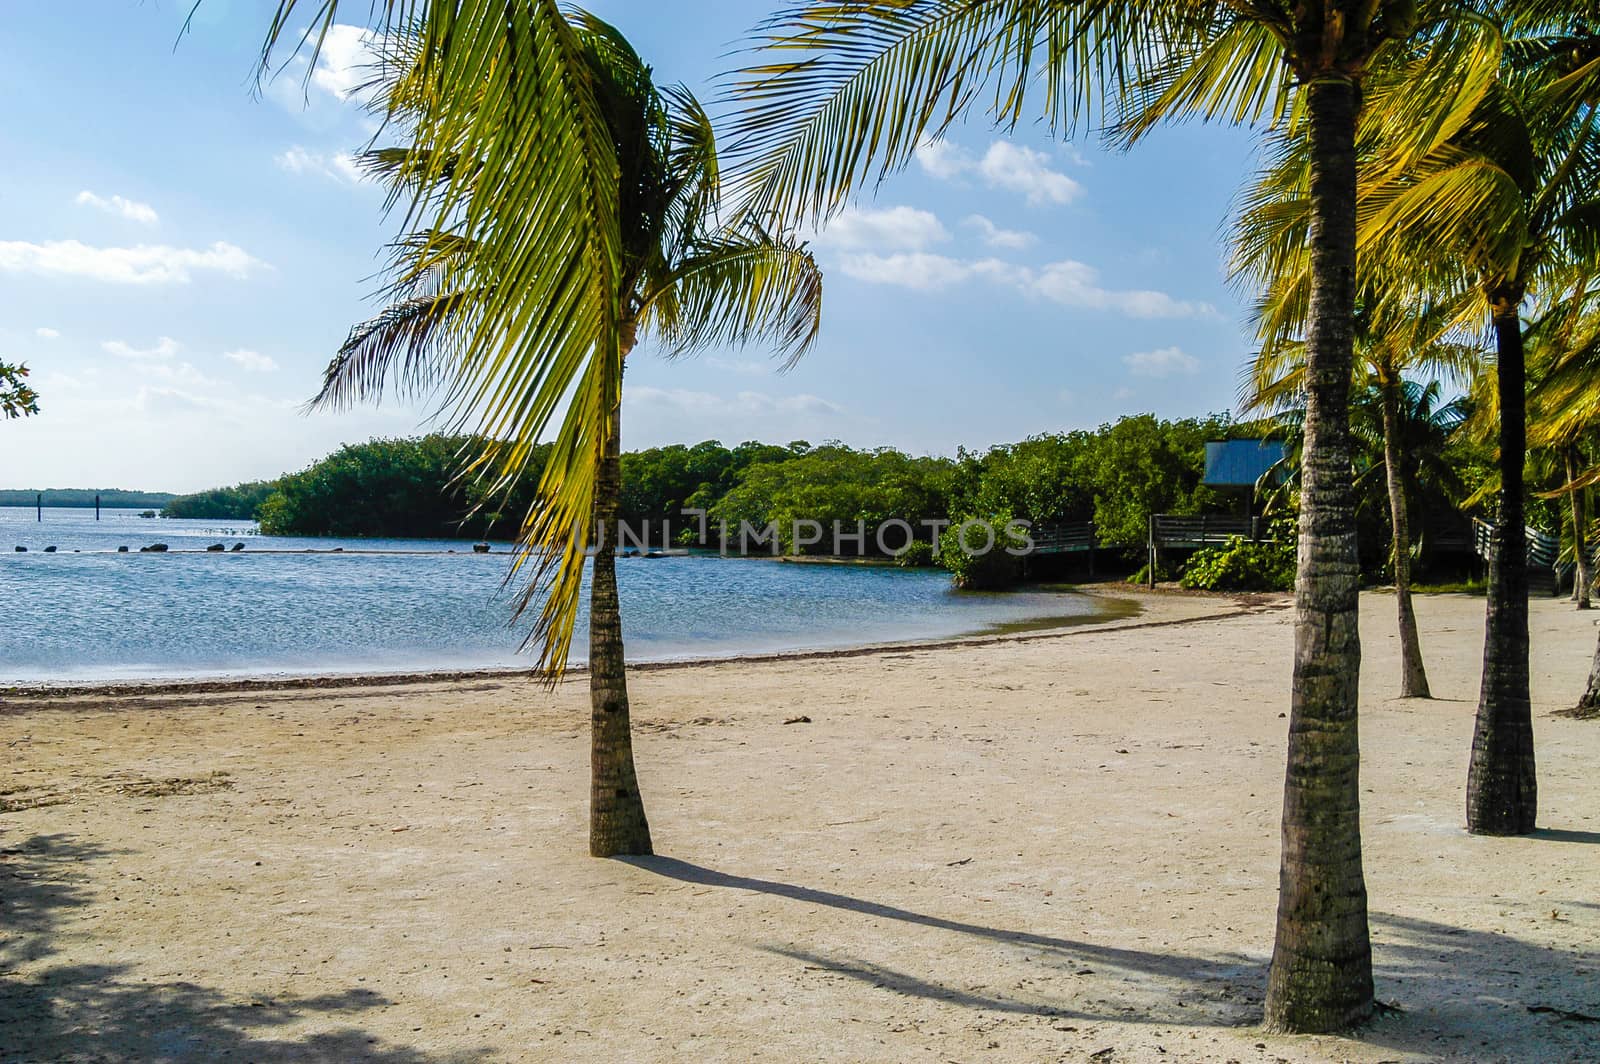 Clean, sandy beach in Puerto Rico.  White puffy clouds on blue sky with palm trees.